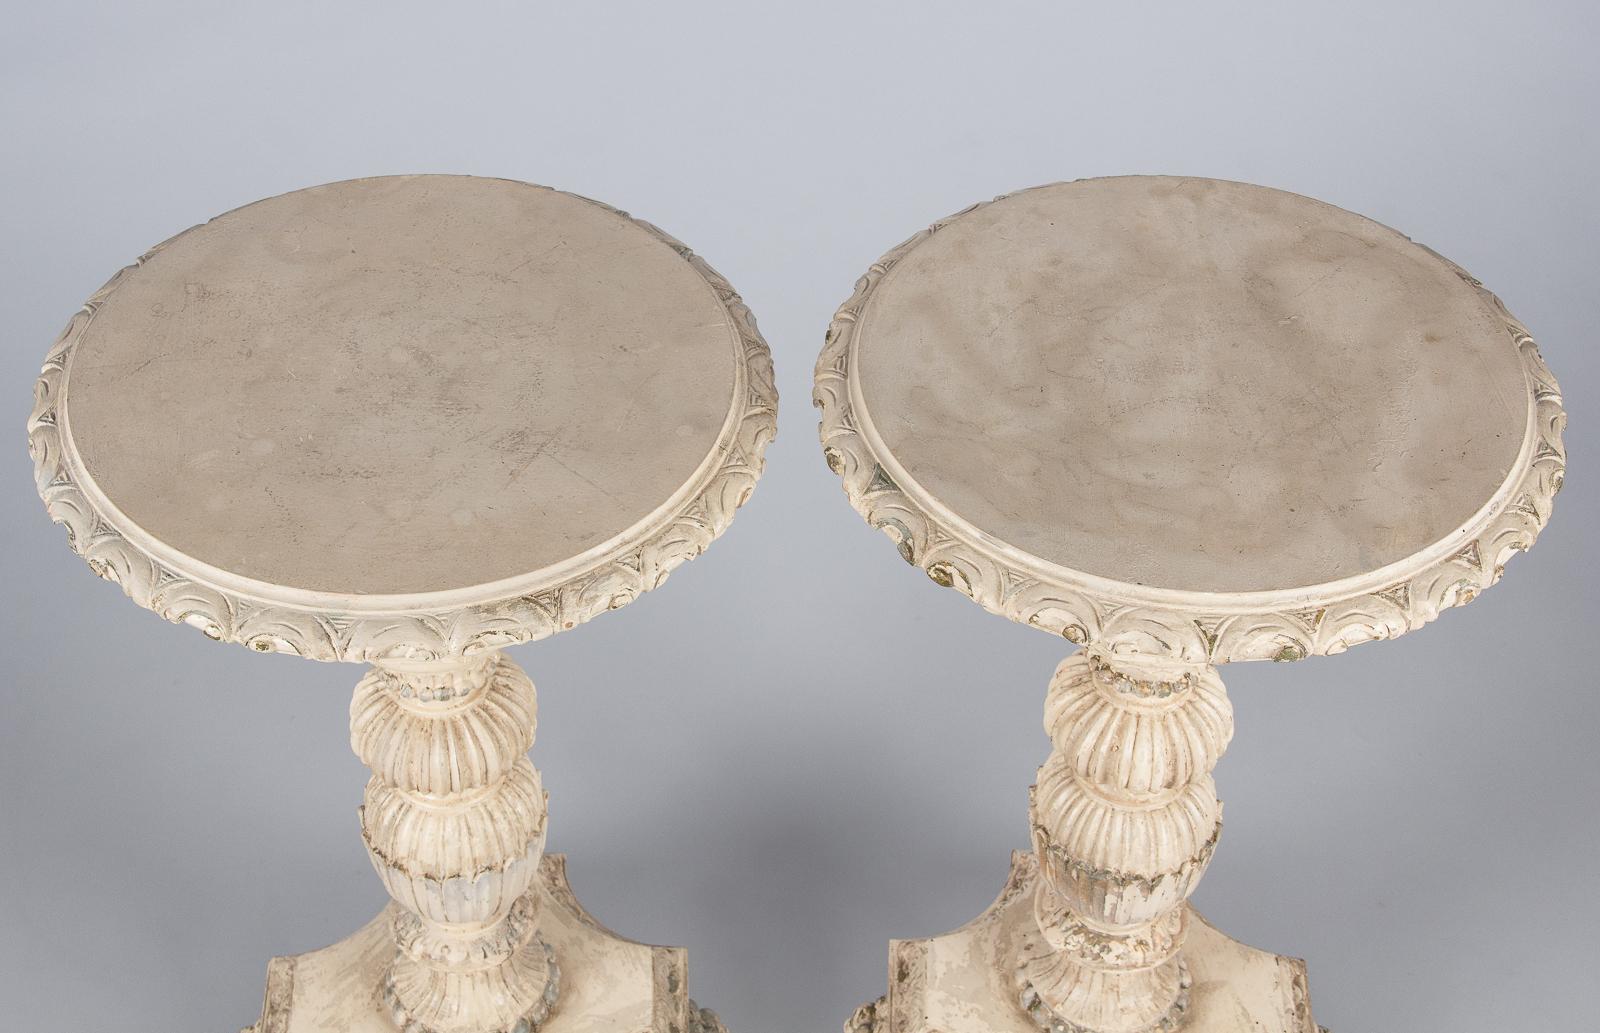 Beech Pair of Italian Renaissance Revival Painted Side Tables, 1950s